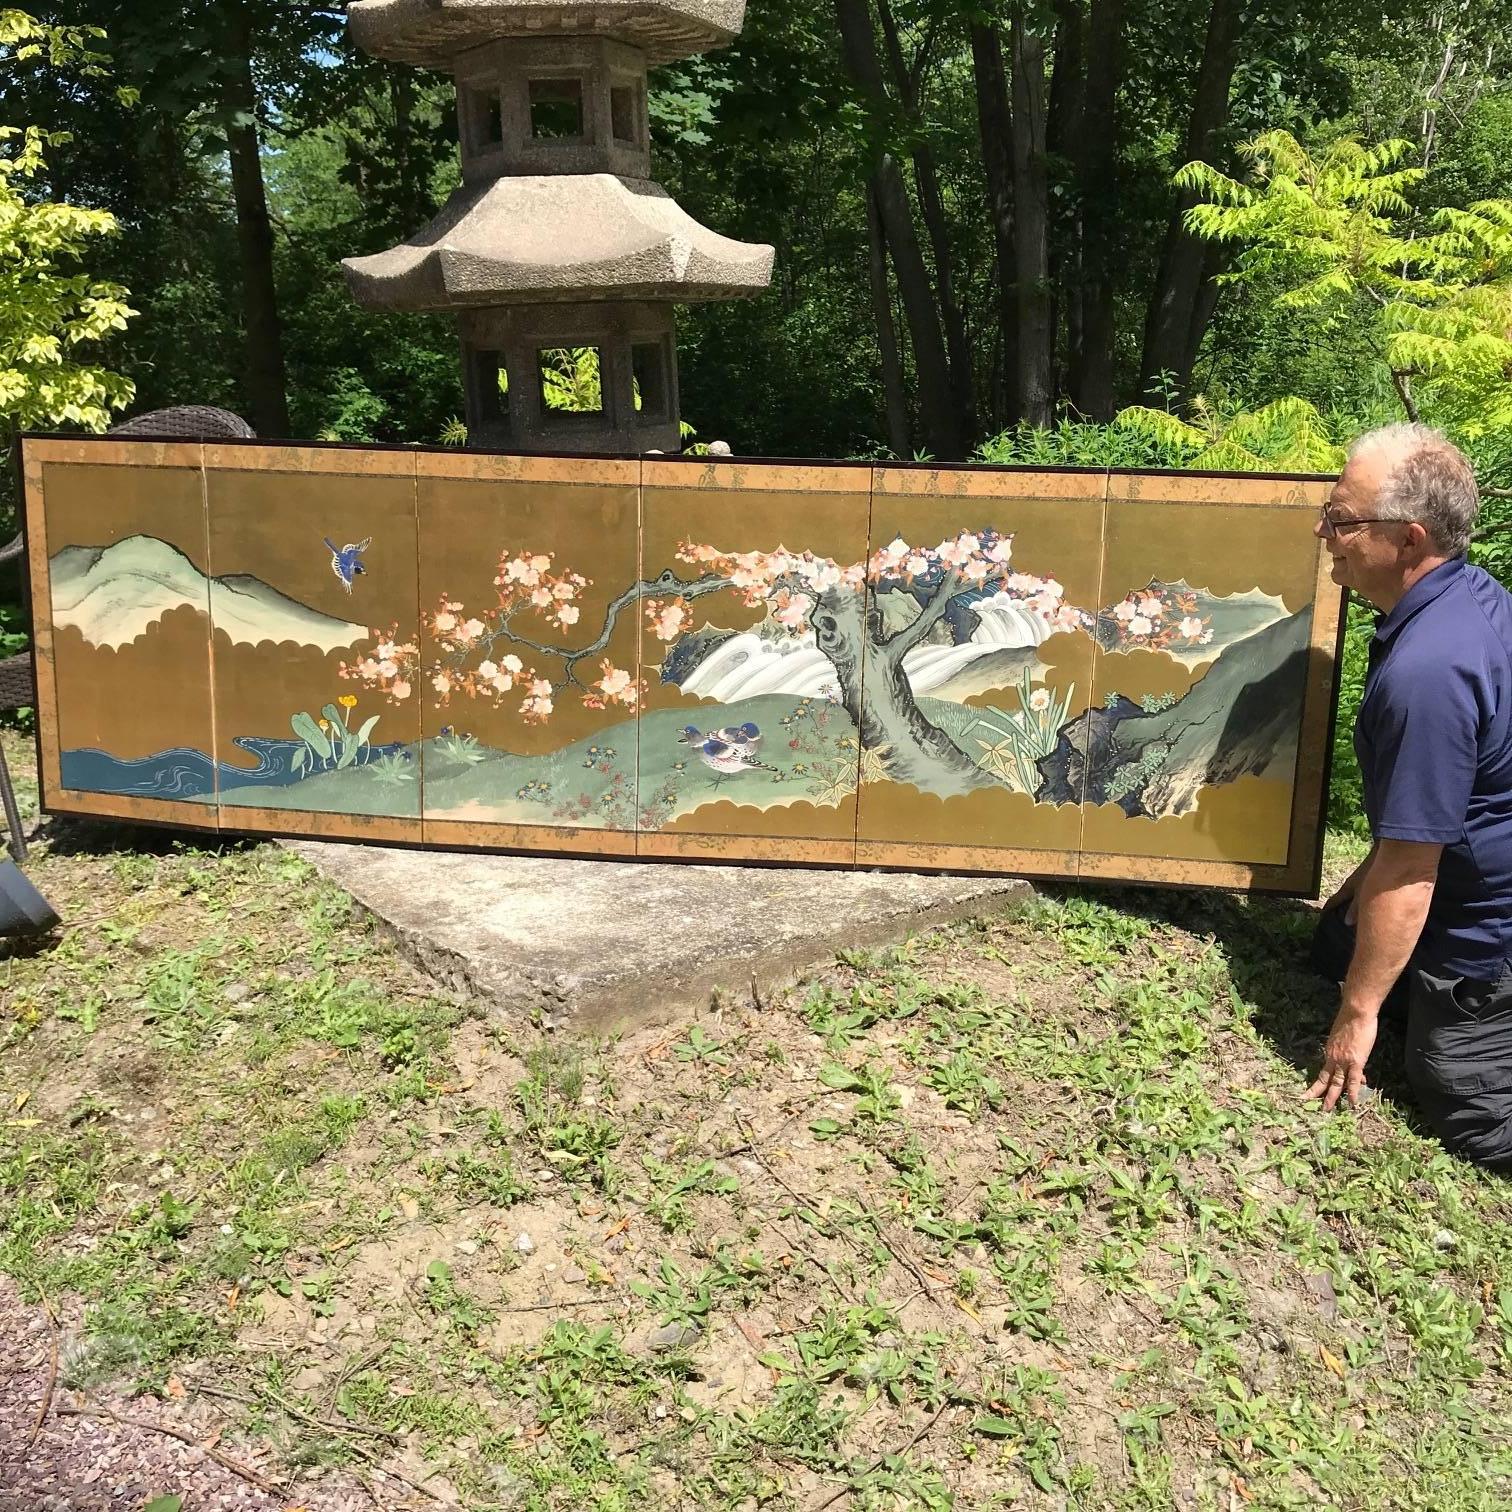 Four seasons delight.

A fine early small-scale Japanese antique hand-painted six-panel folding screen byobu conceived in a convenient size. 

The four seasons depicted. Lovely vivid colors feature classic colorful spring and summer subject